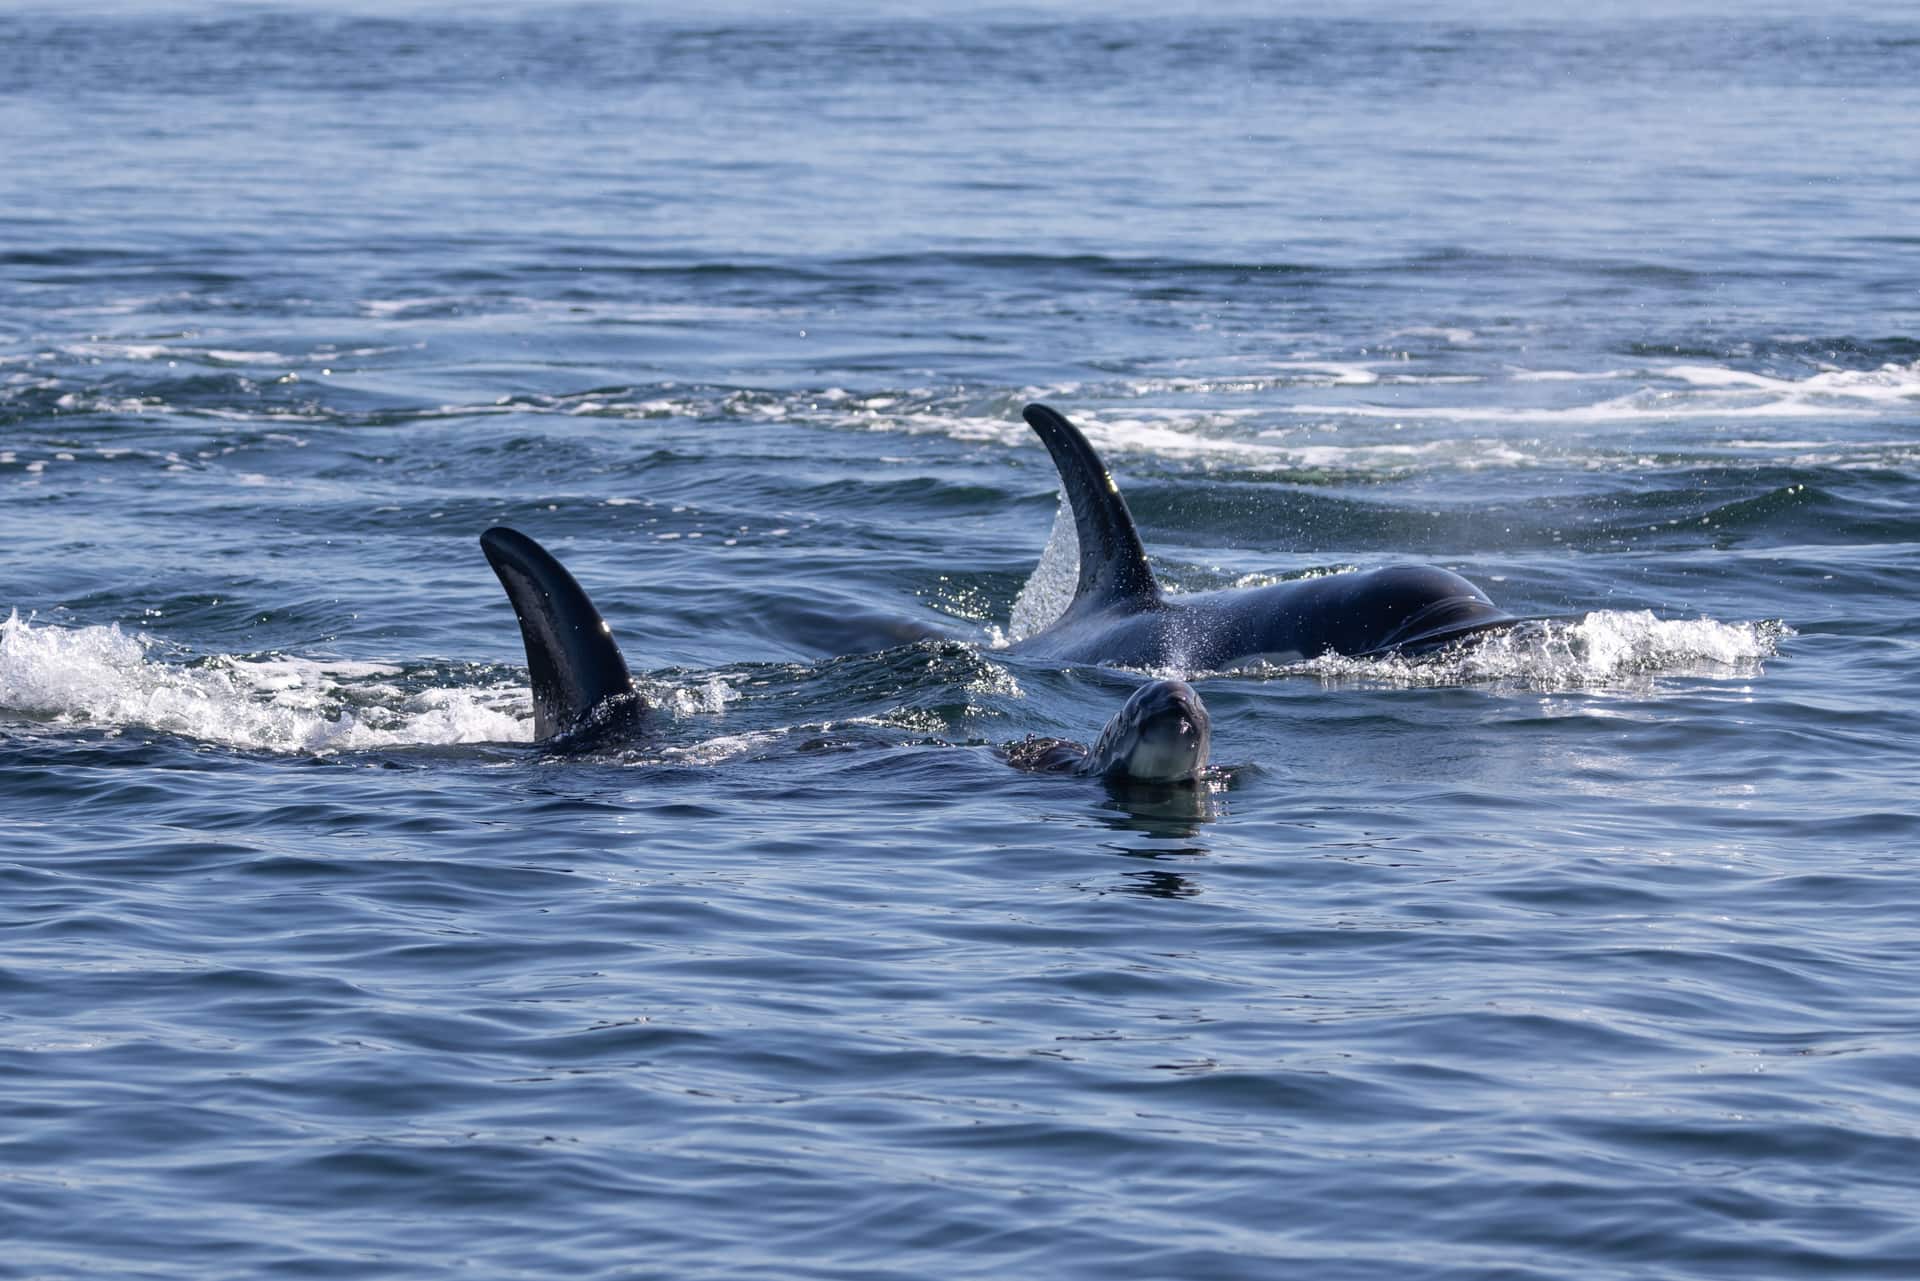 An injured and exhausted harbor porpoised being pursued by 2 Southern Resident killer whales.